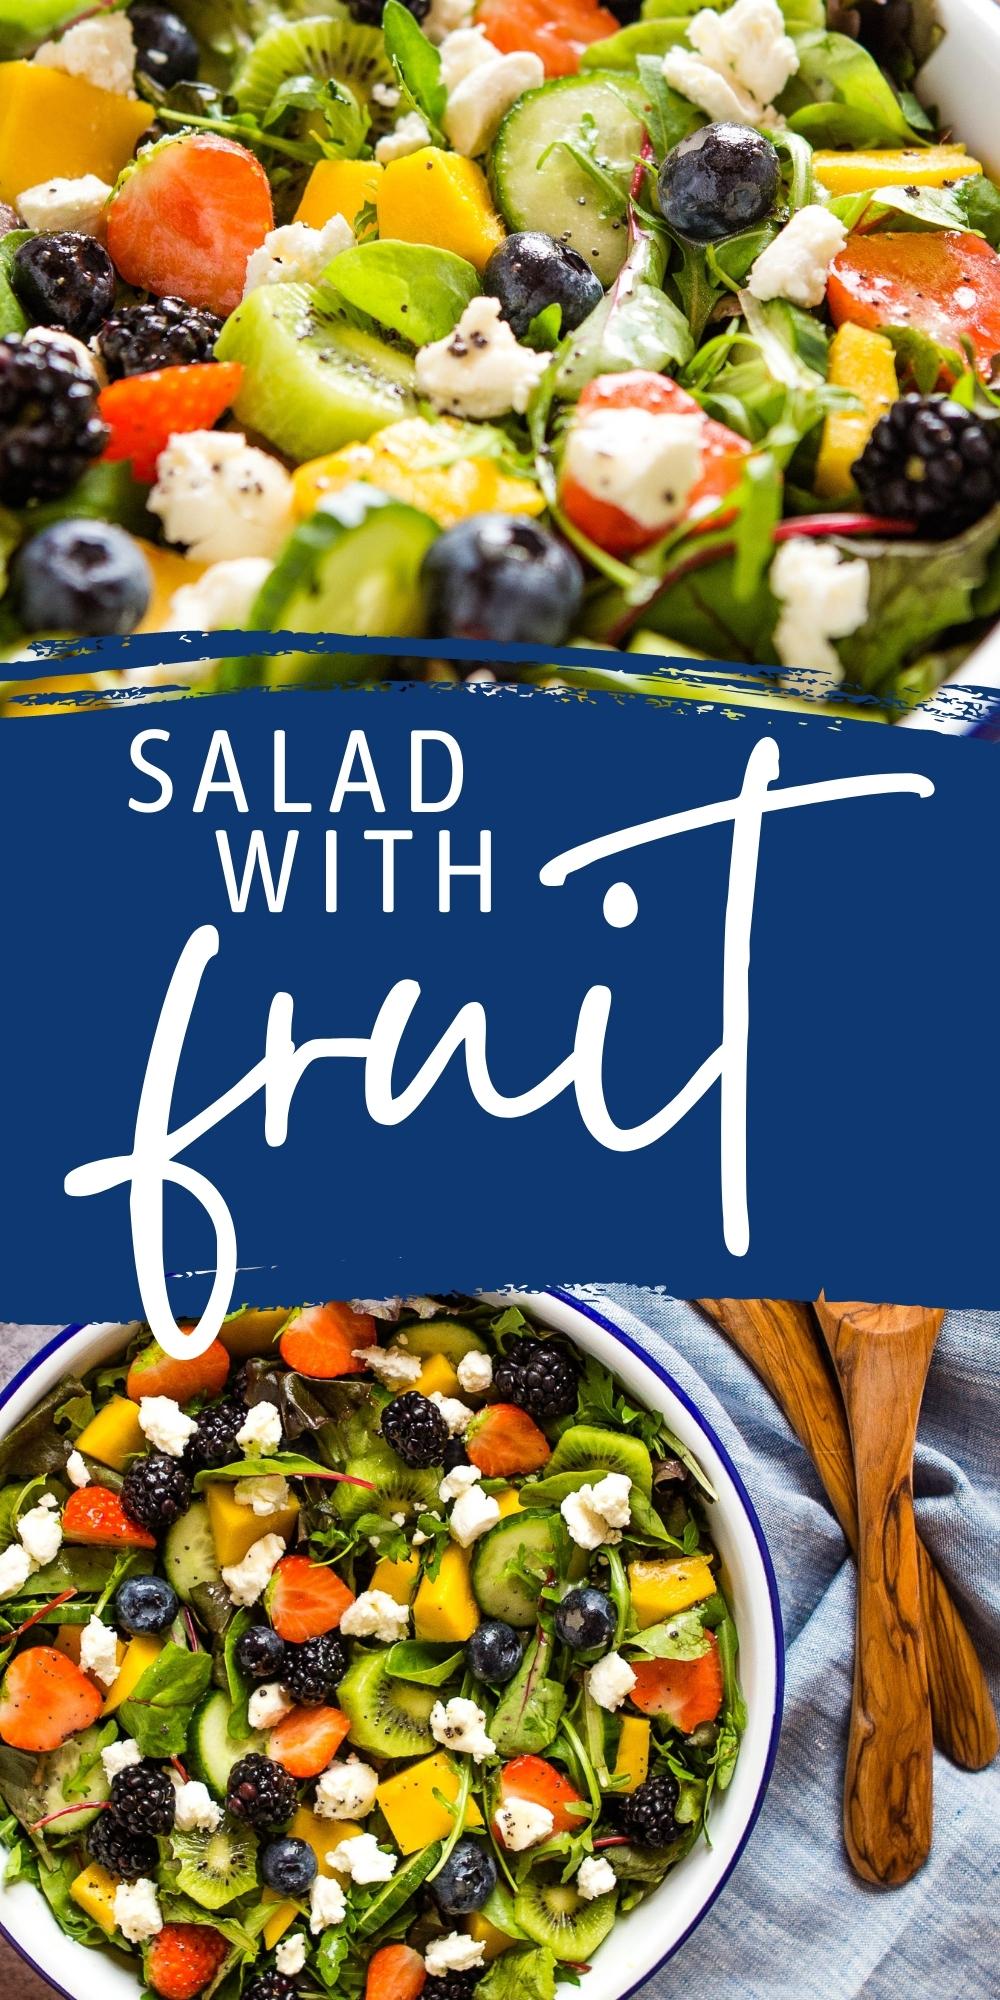 This Salad with Fruits recipe is beautifully fresh and colourful - sweet fruit and berries, mixed greens, goat cheese and a simple lemon poppyseed dressing! Recipe from thebusybaker.ca! #saladwithfruits #saladwithfruit #fruitsalad #summersalad #barbecue #healthy #vegetarian via @busybakerblog